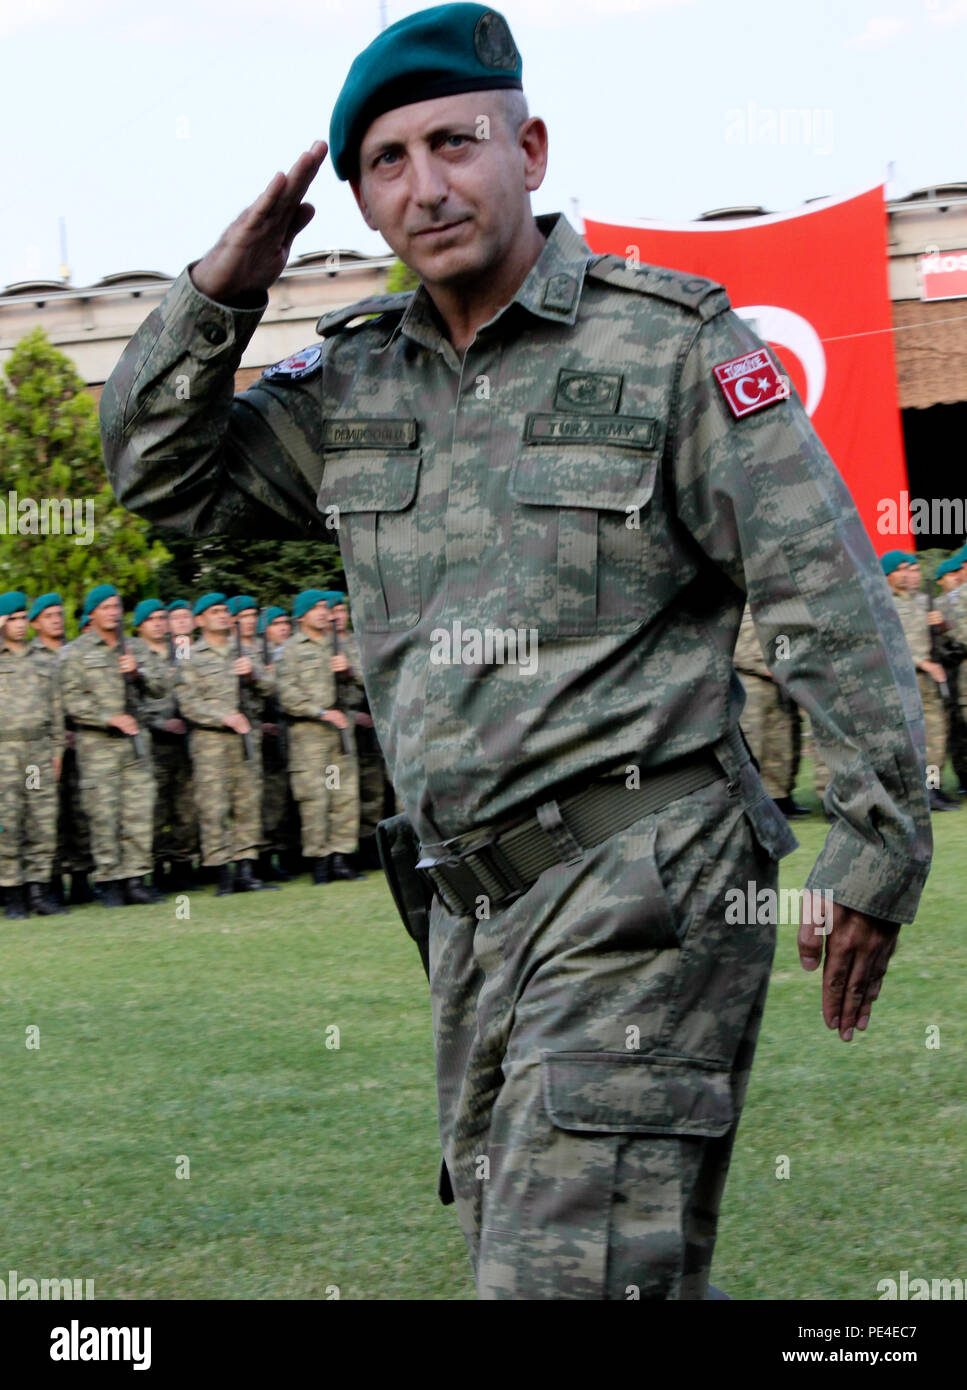 Turkish Col. Omer Faruk Demircioglu, outgoing commander for the Turkish National Command Contingent to Kosovo and Joint Regional Detachment-South, salutes the official party during his change of command ceremony Sept. 3, 2015, in Prizren, Kosovo. JRD-S and its liaison monitoring teams are part of NATO’s peace support mission in the region, known as Kosovo Force. (U.S. Army photo by Sgt. Erick Yates, Multinational Battle Group-East) Stock Photo